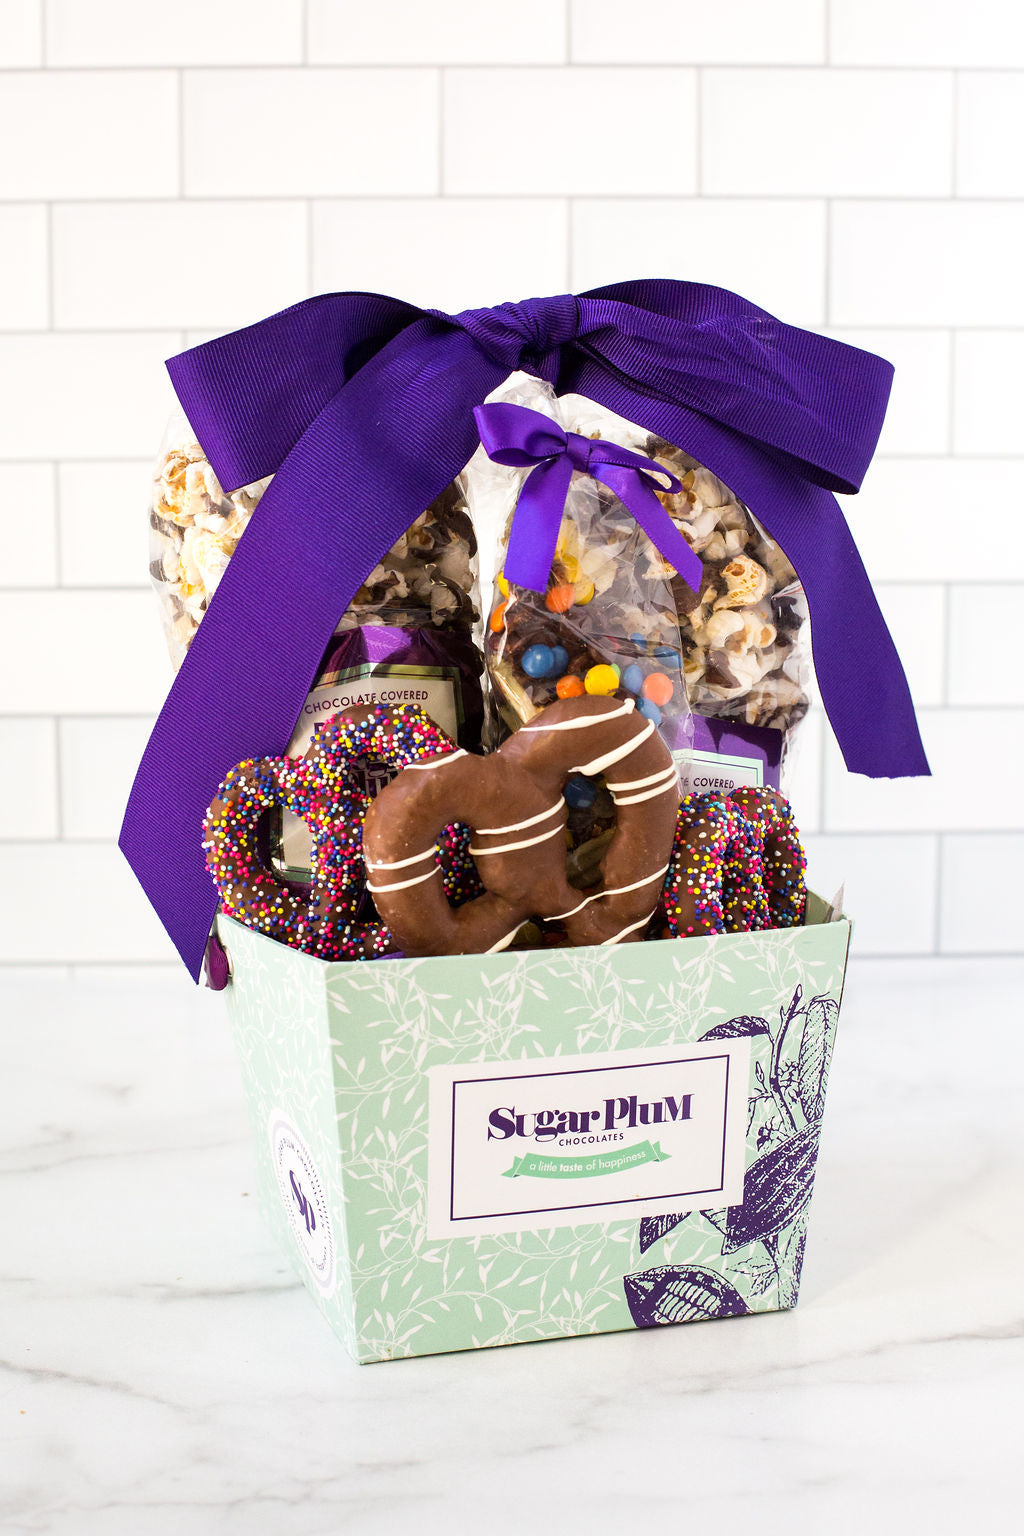 Sugar Plum&#39;s Perfect Size Gourmet Chocolate Gift Assortment includes a mouth-watering variety of chocolate-covered delectables and includes an assortment of chocolate-dipped potato chips covered with candied chocolate gems, chocolate-dunked pretzels and our famous chocolate-drizzled popcorn.